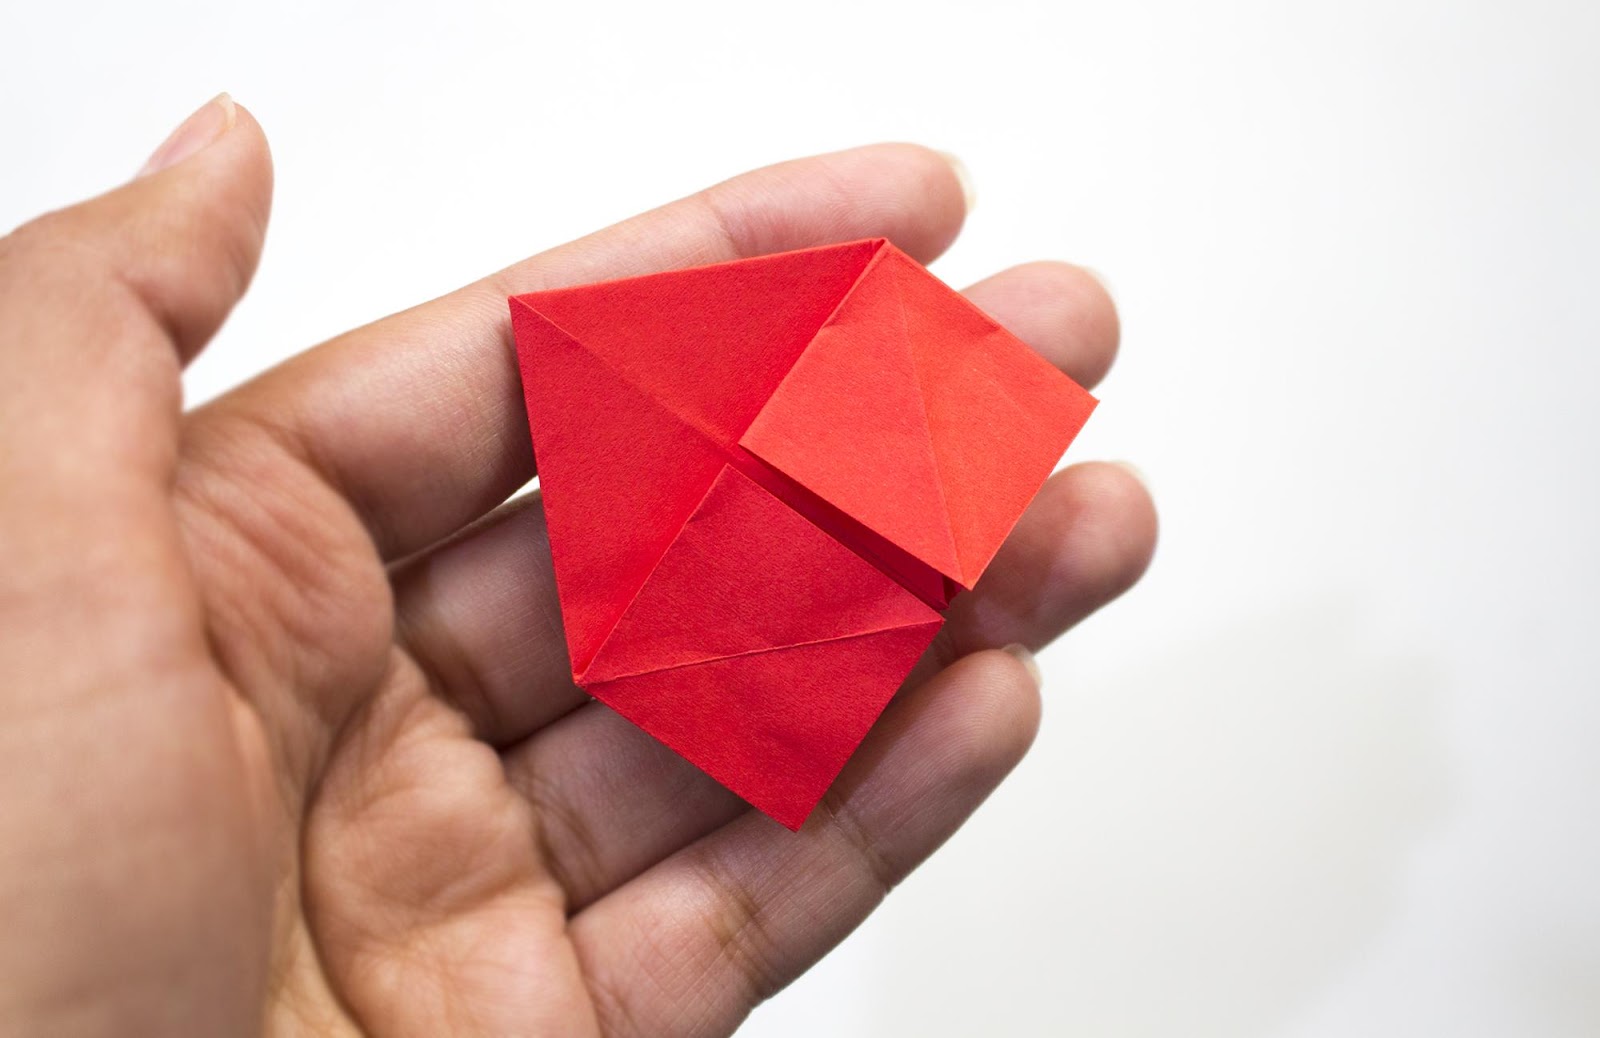 Red paper in the shape of a house from another angle